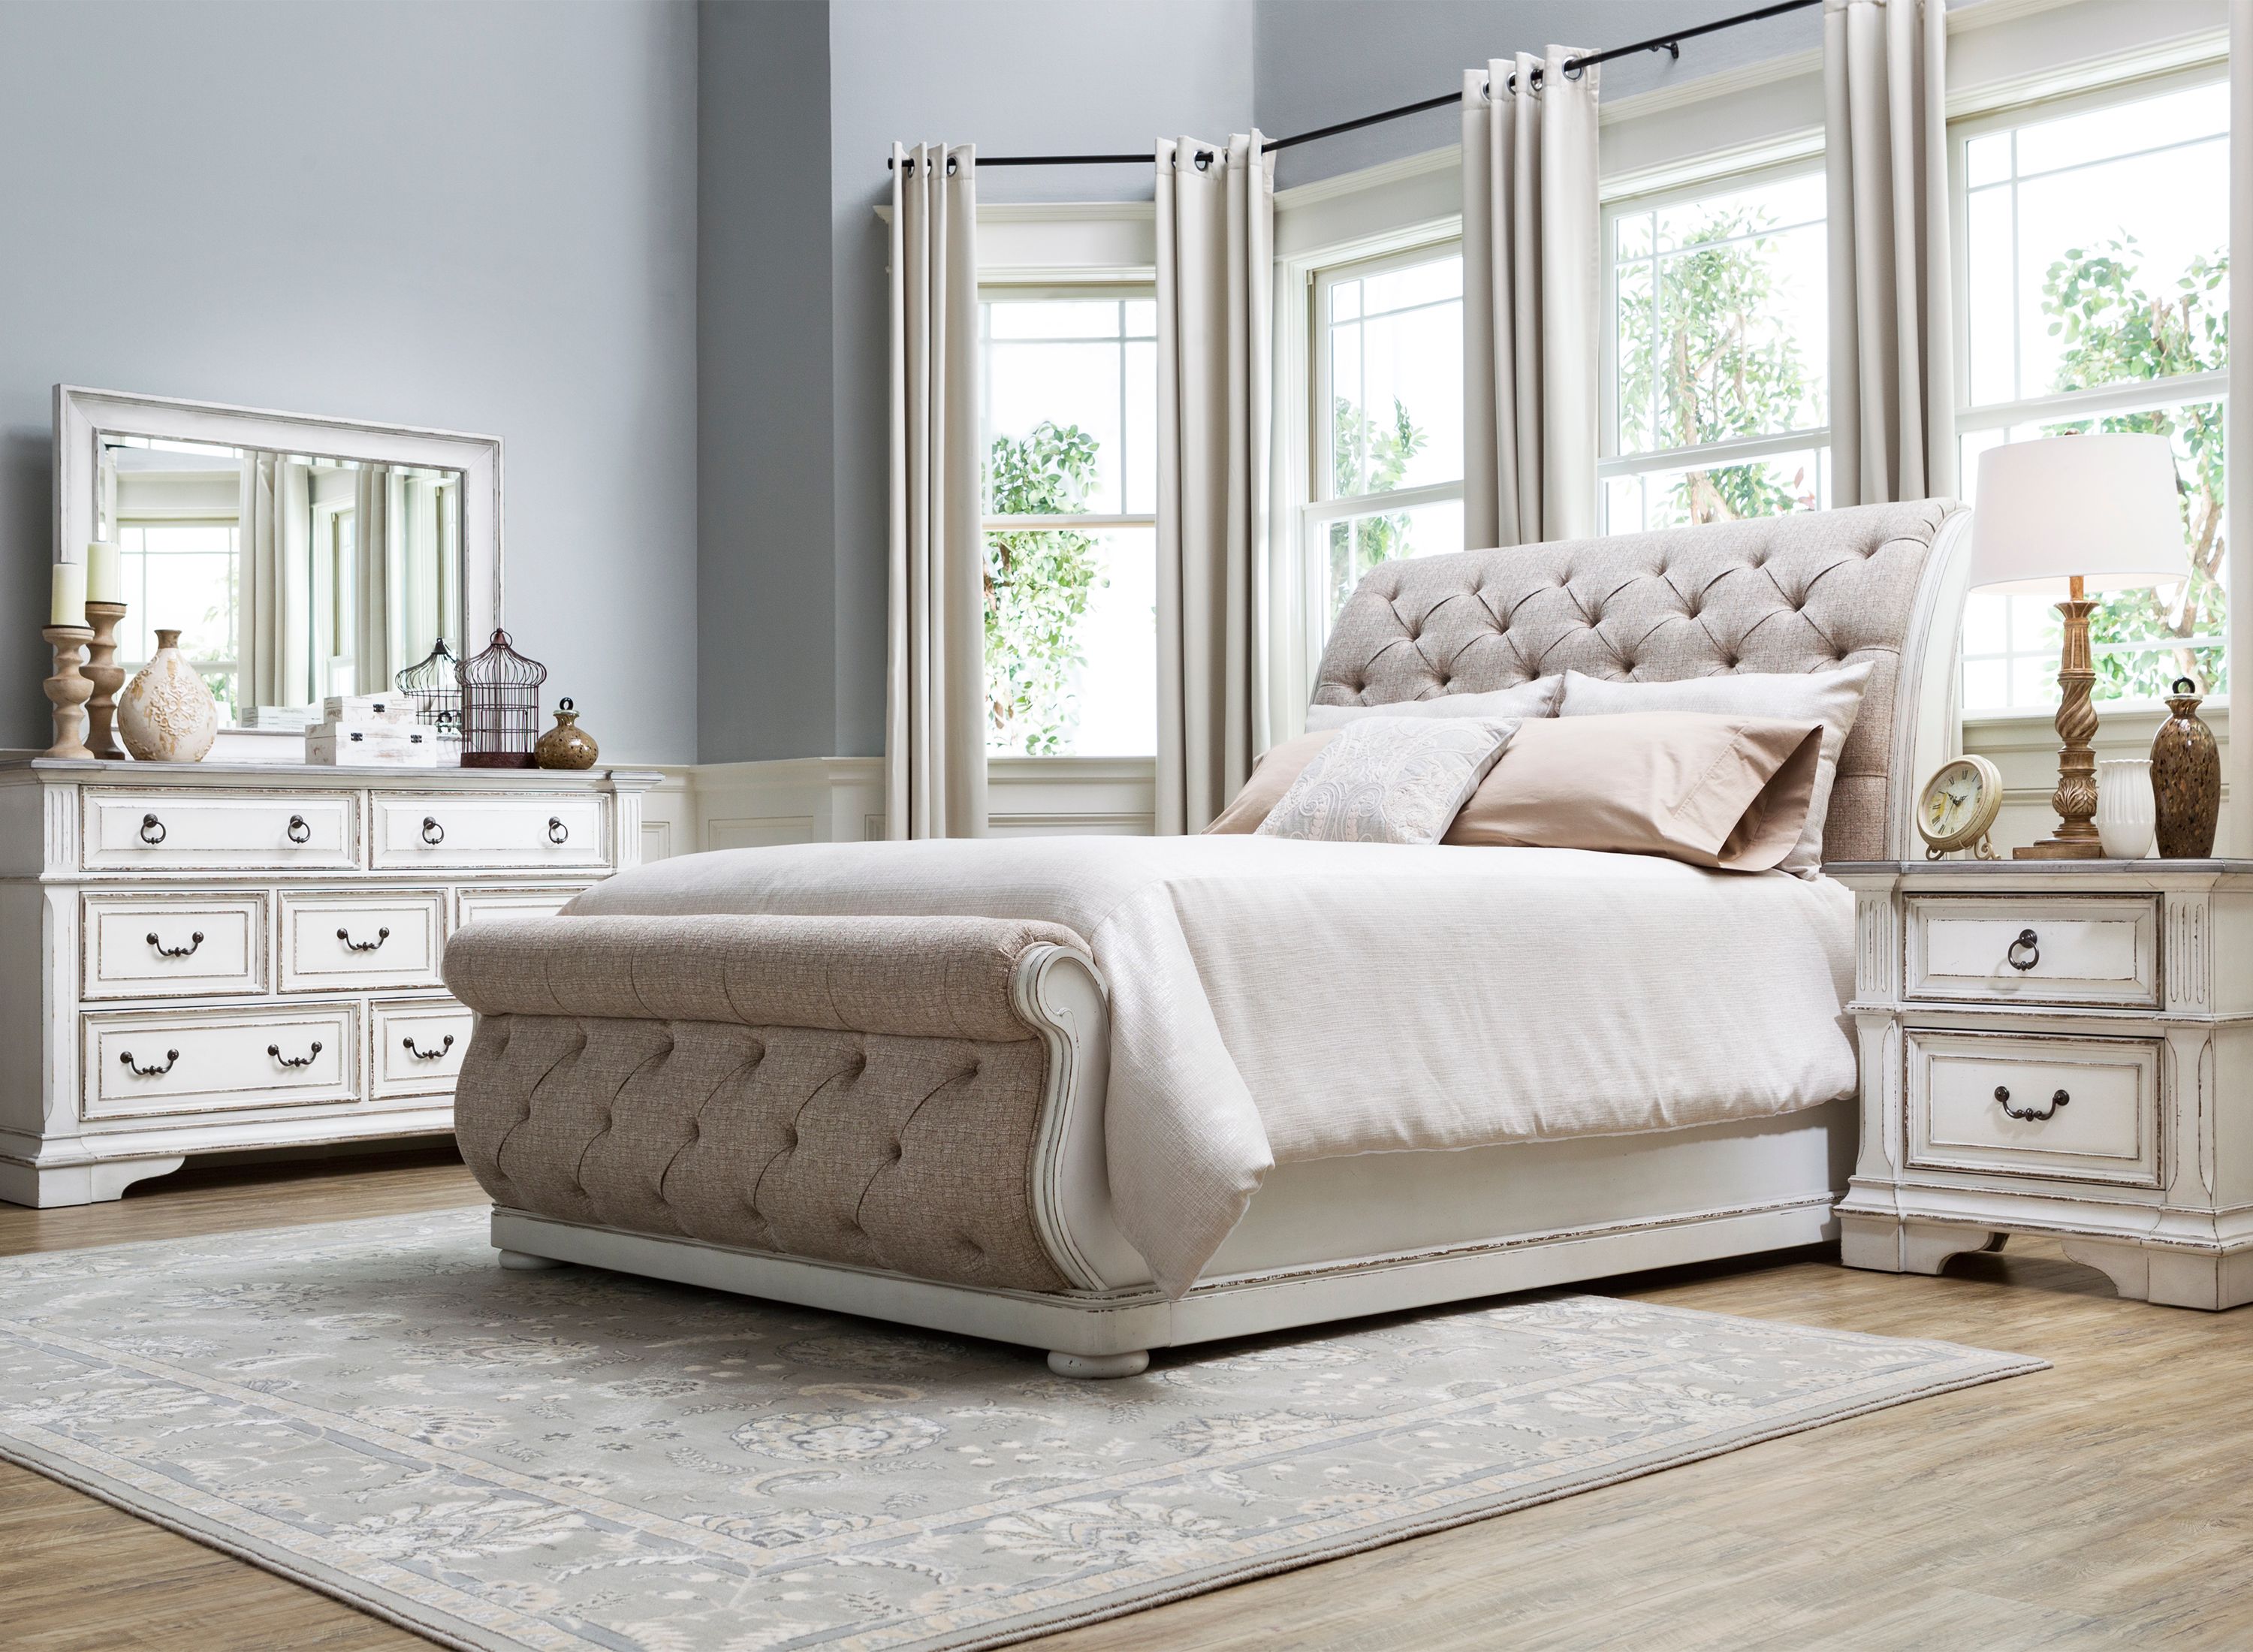 Birmingham 4 Pc Bedroom Set Raymour, Raymour And Flanigan King Bed